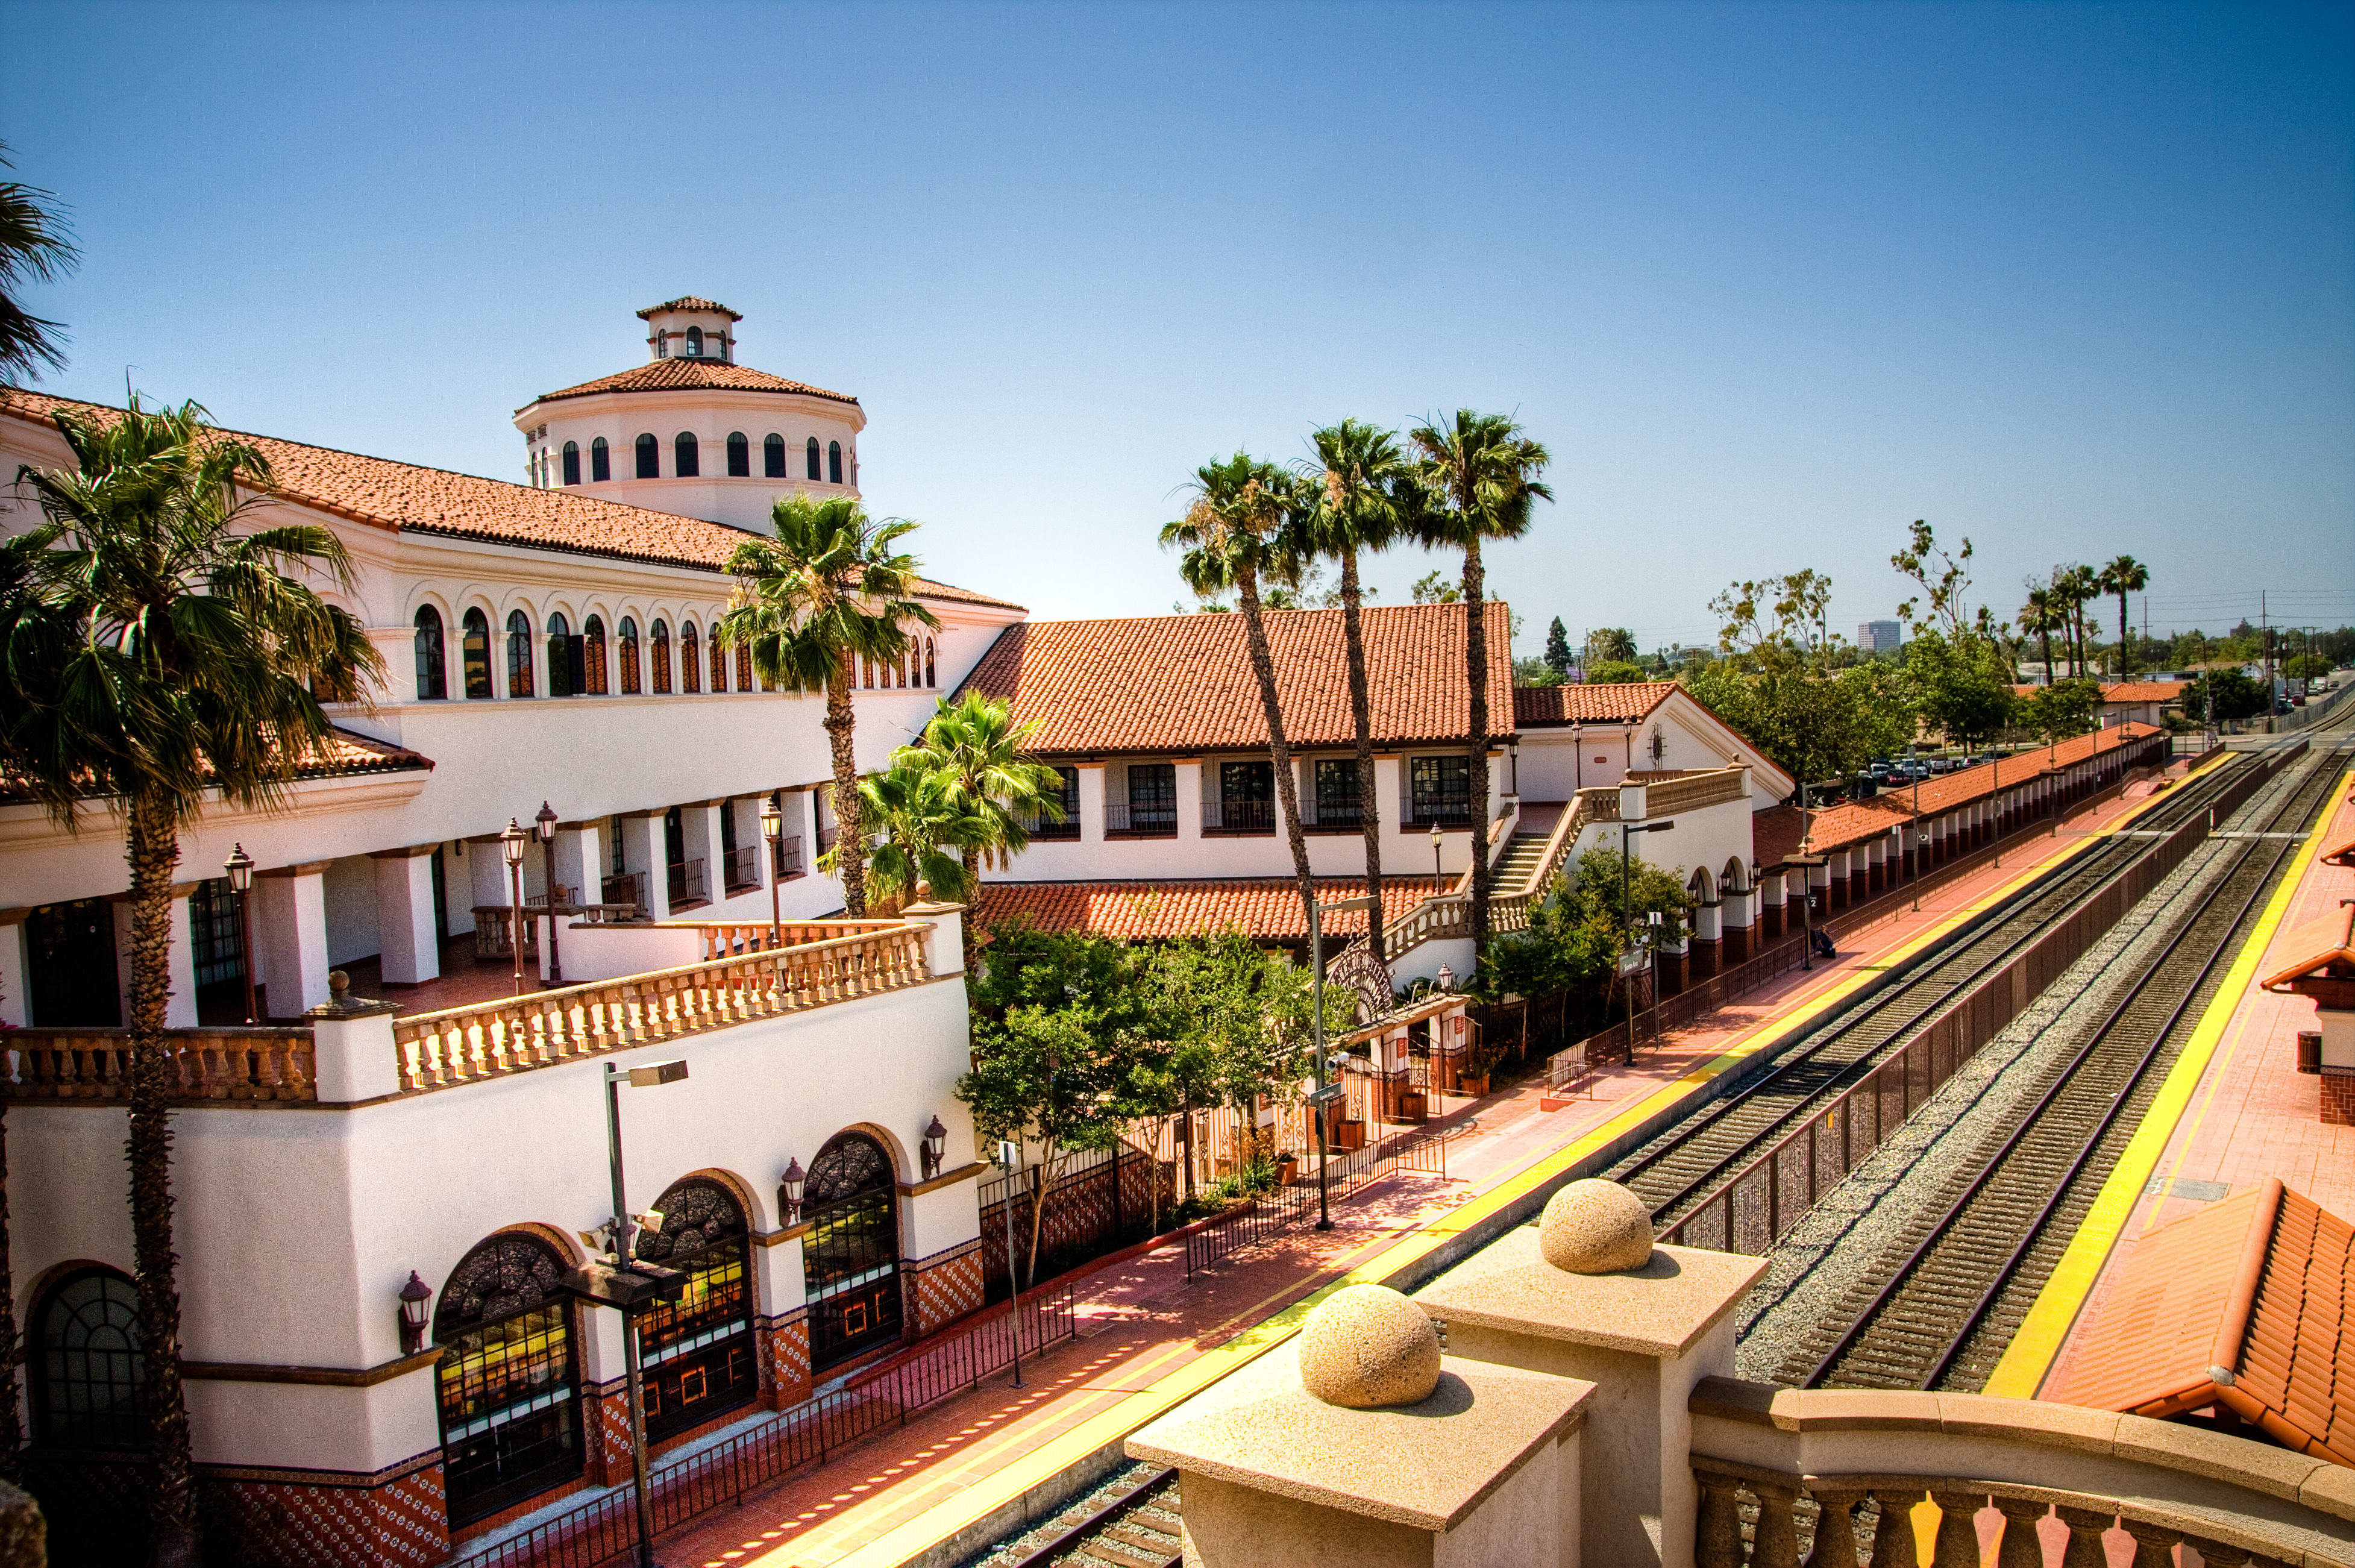 View of the train station in Santa Ana, California with train tracks running between two buildings of the station.